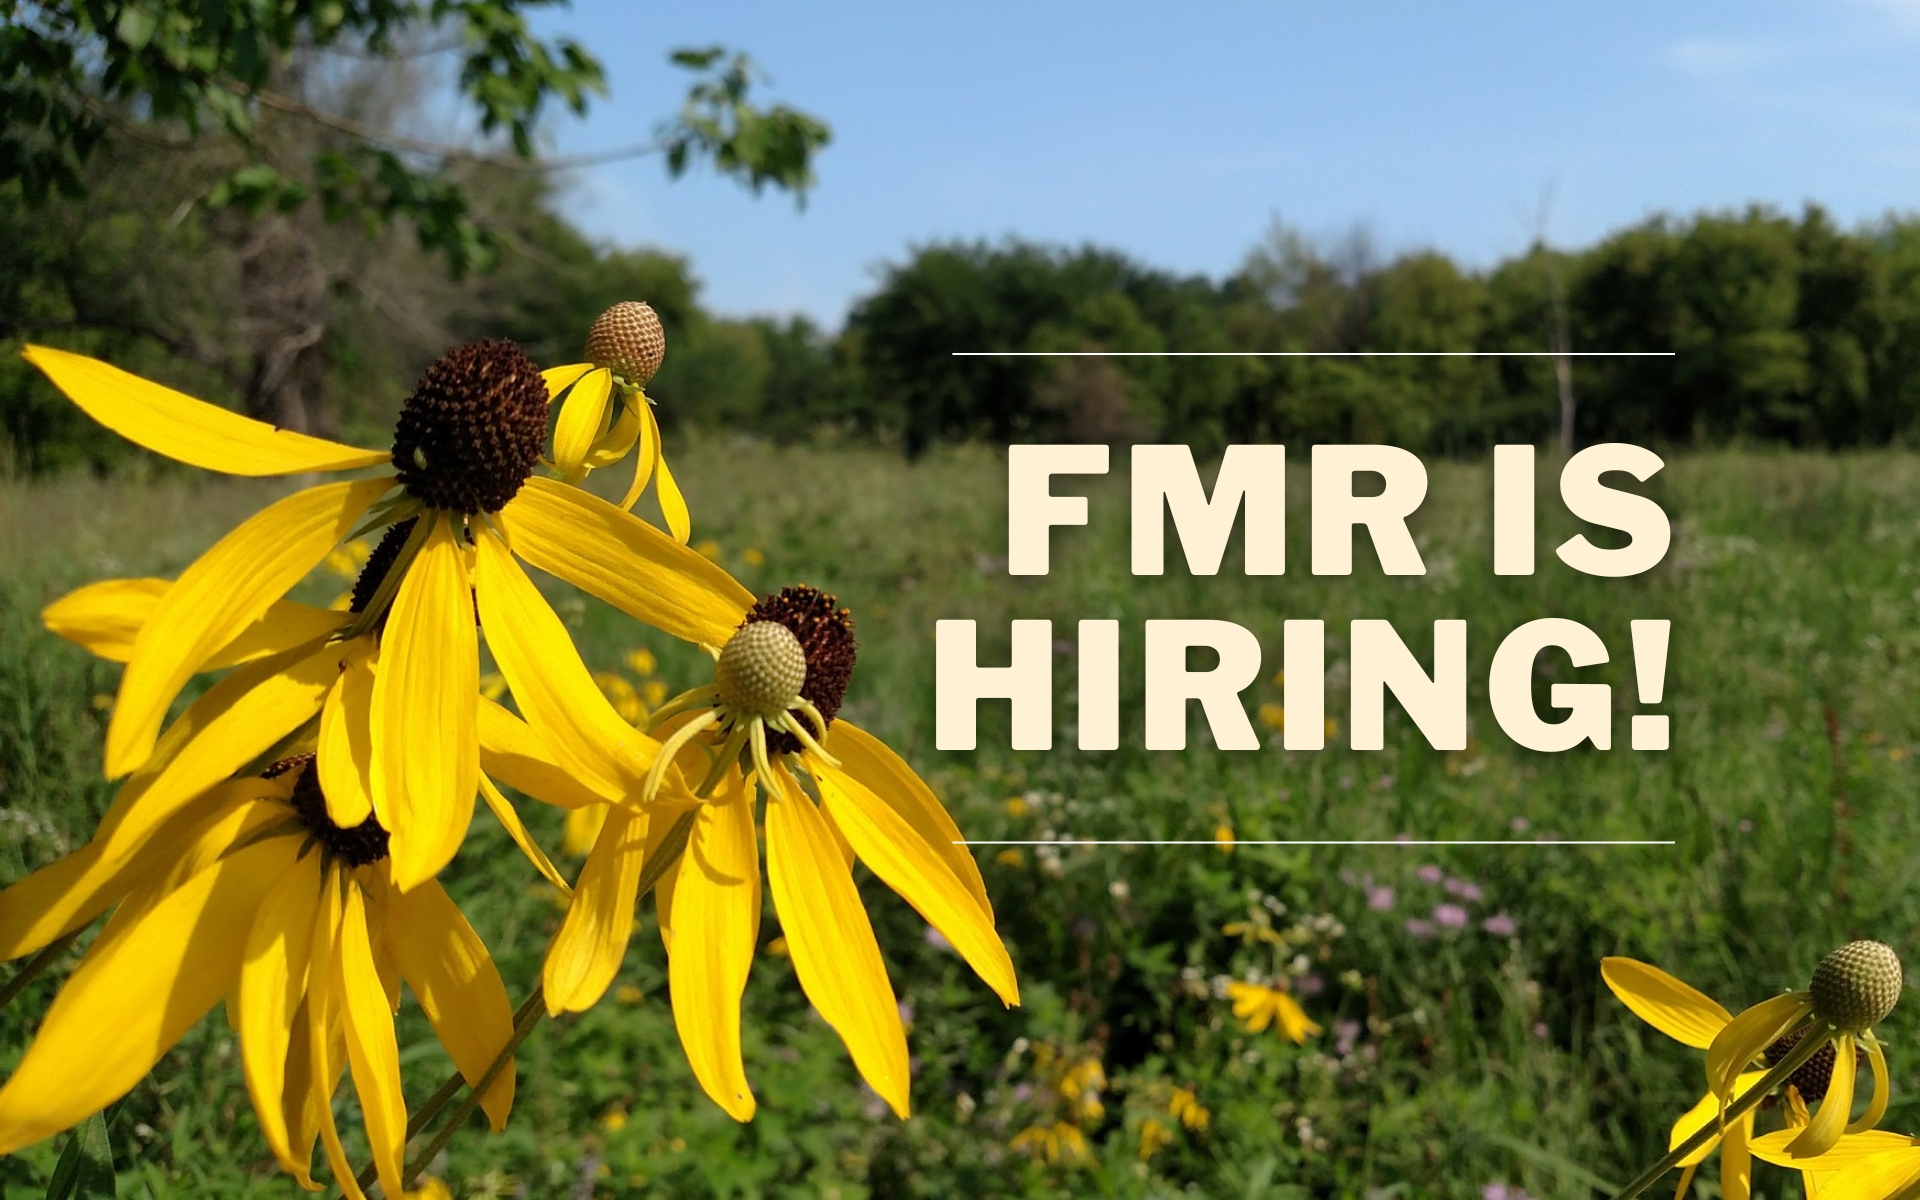 A close-up of a yellow coneflower with text that says "FMR is hiring!"